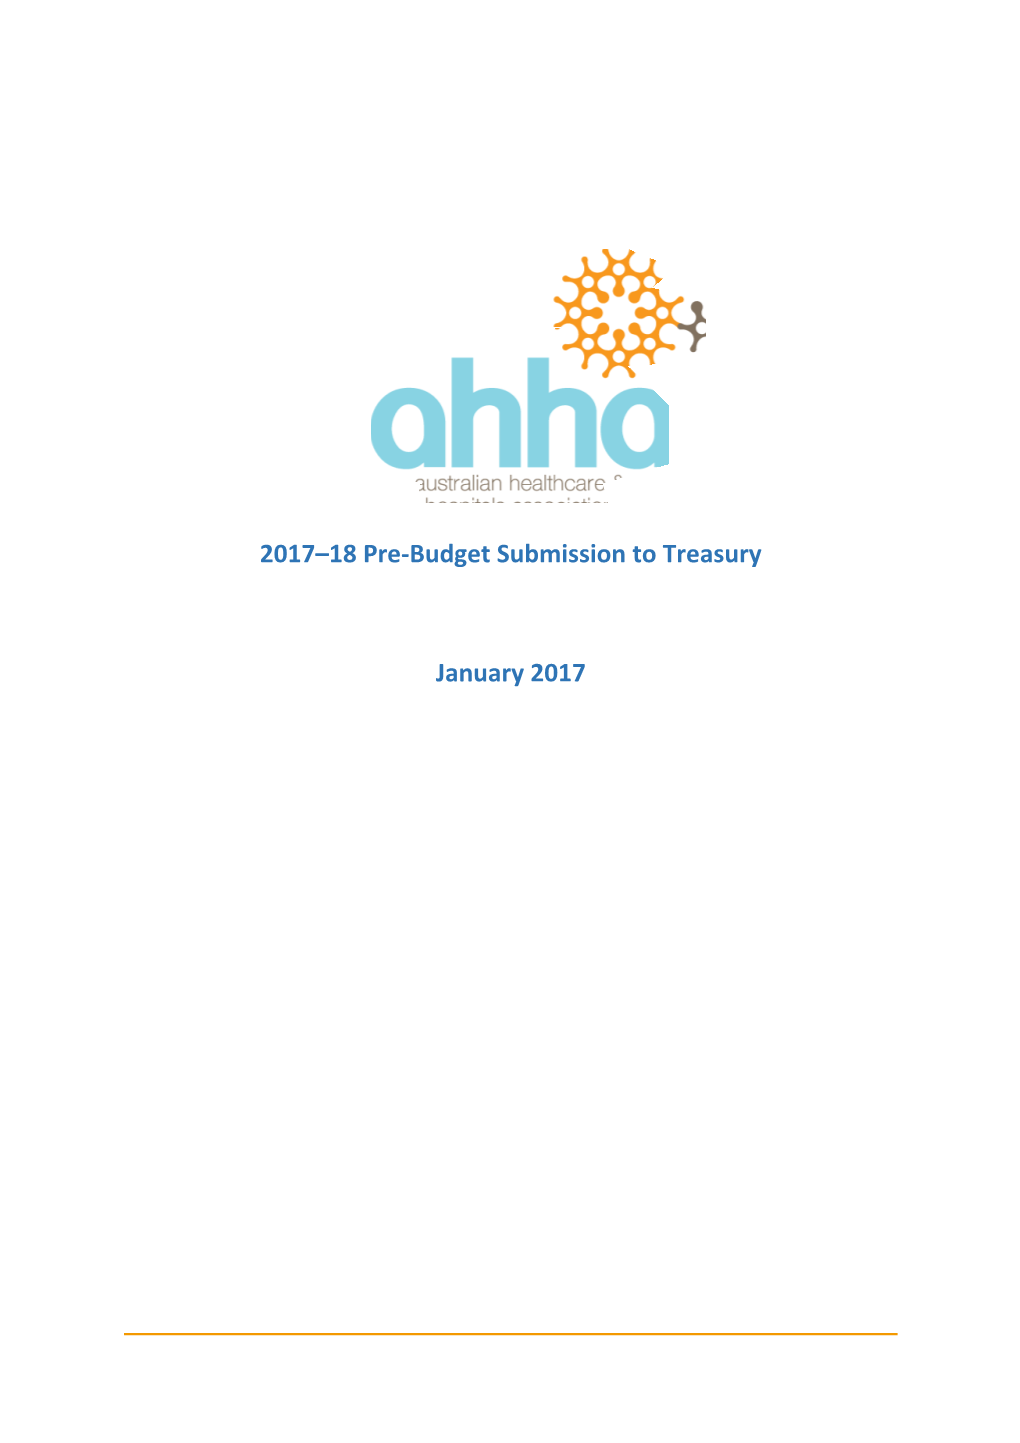 Australian Healthcare and Hospitals Association - 2017-18 Pre-Budget Submission